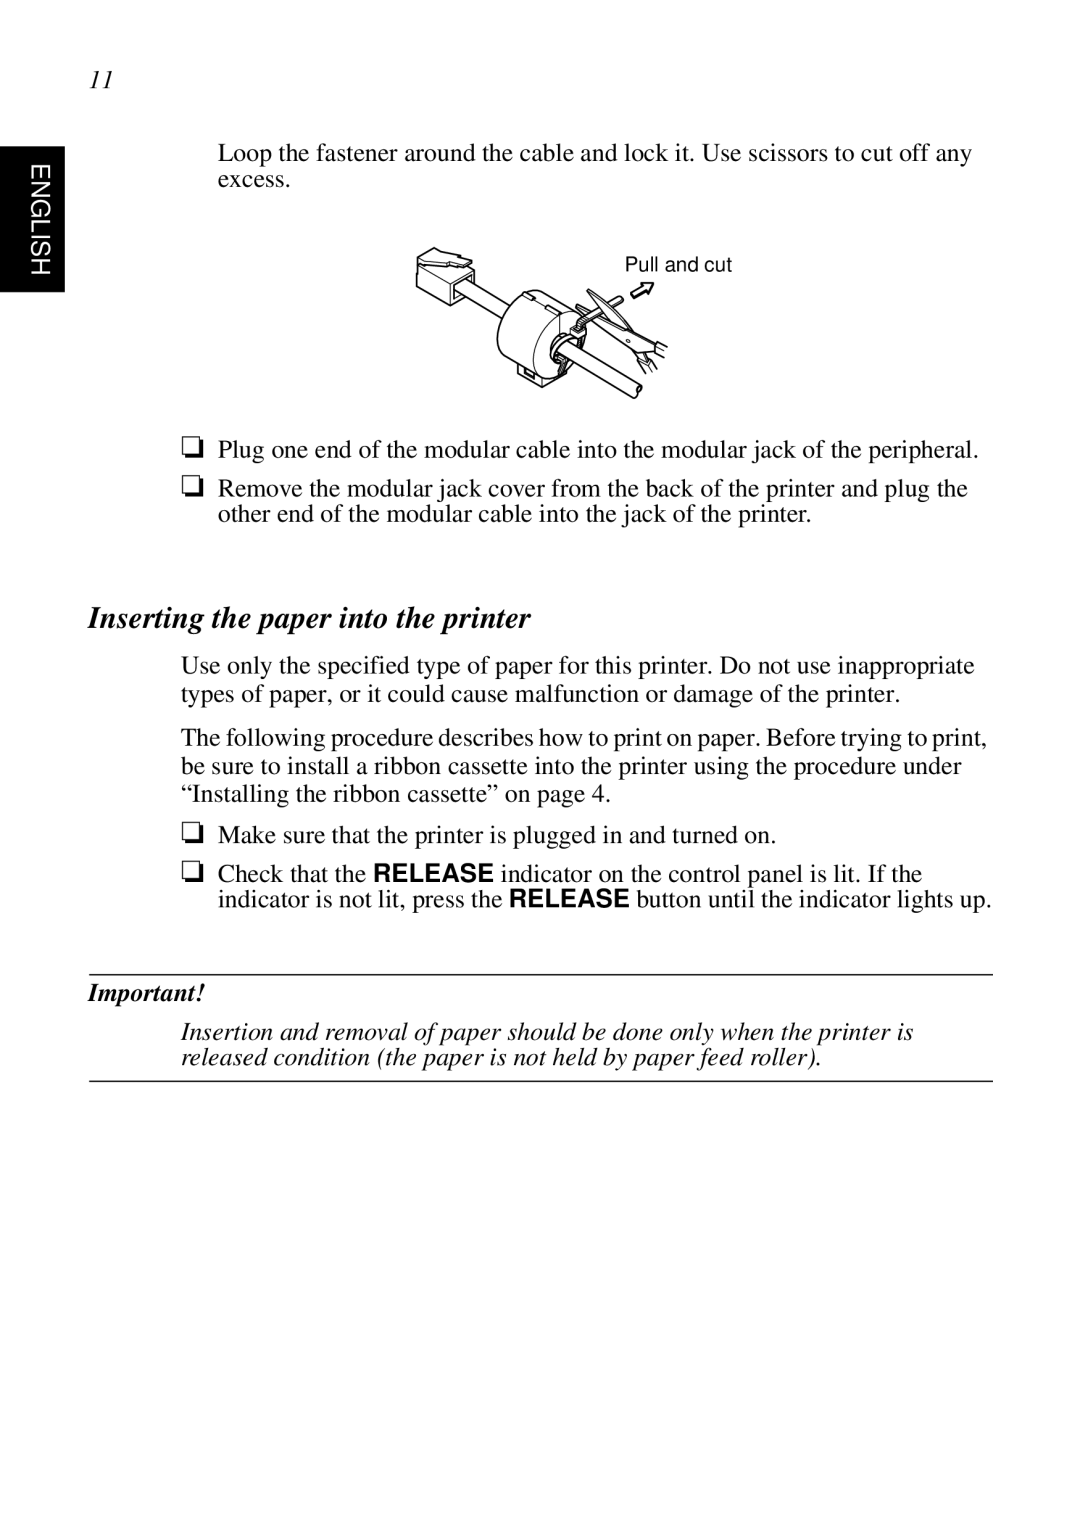 Star Micronics SP298 user manual Inserting the paper into the printer, English 